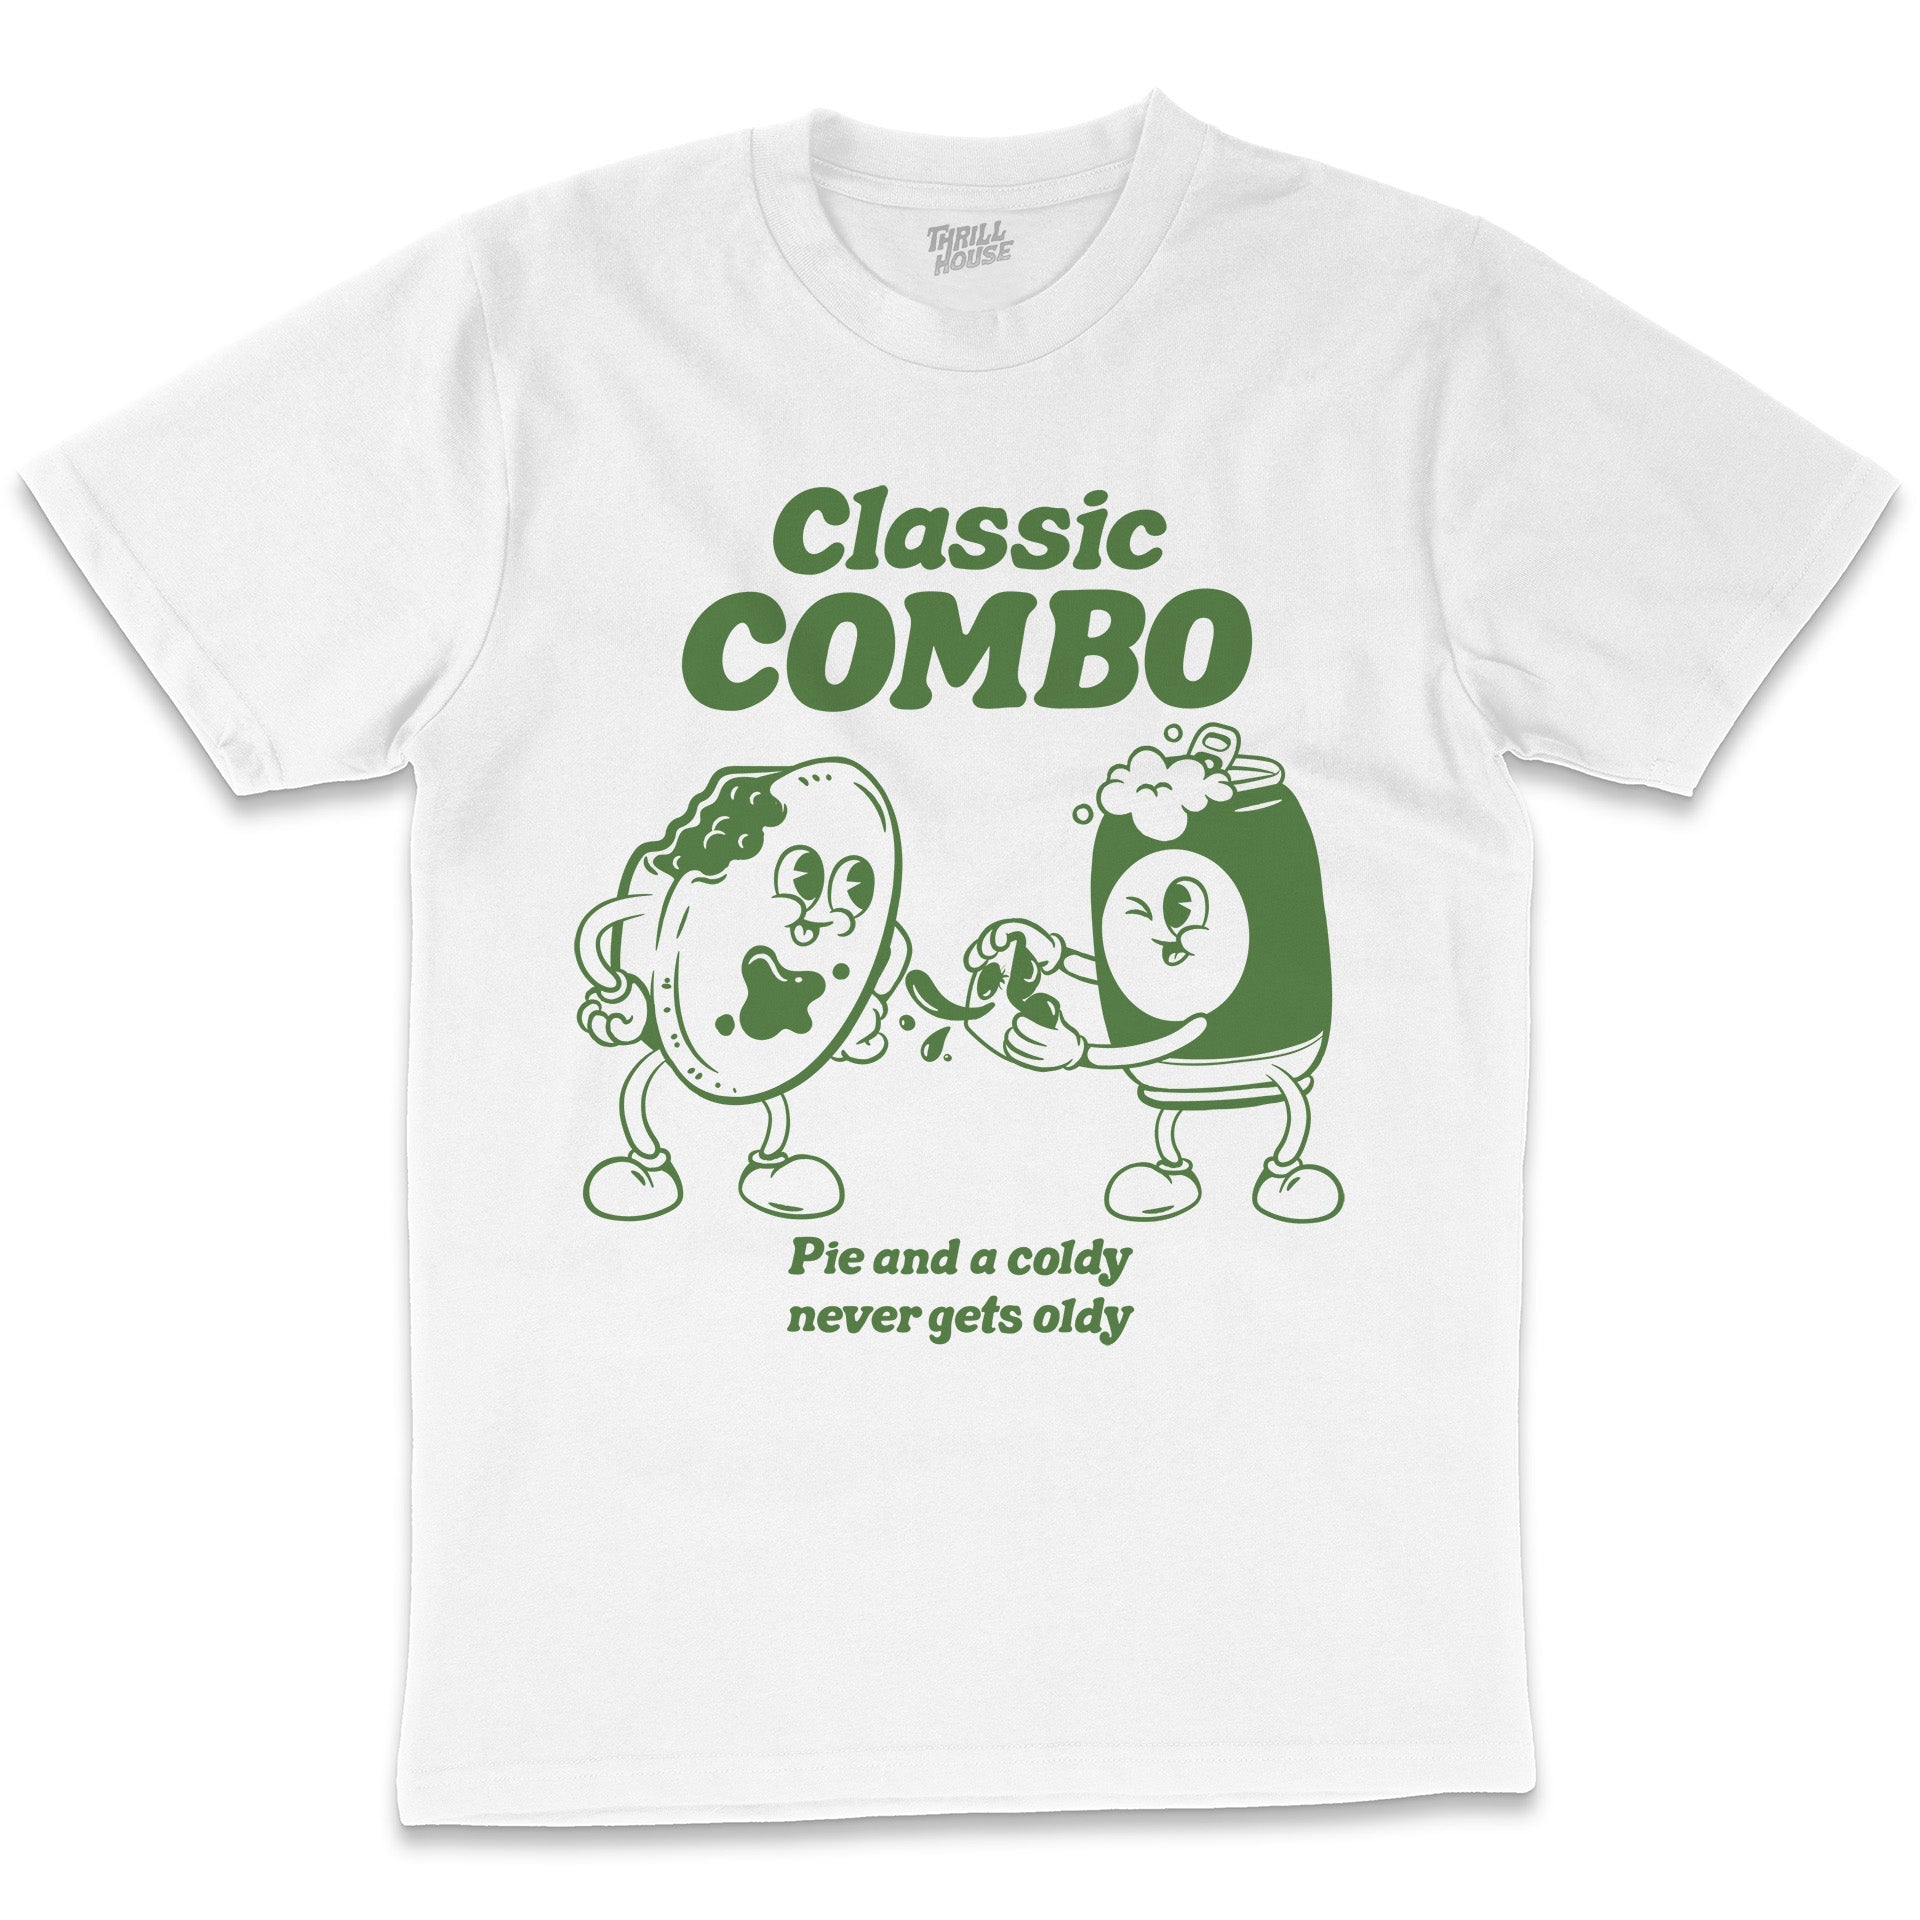 Classic Combo Aussie Beer Pie With Sauce Lager Footy Booze Bogan Straya Cotton T-Shirt